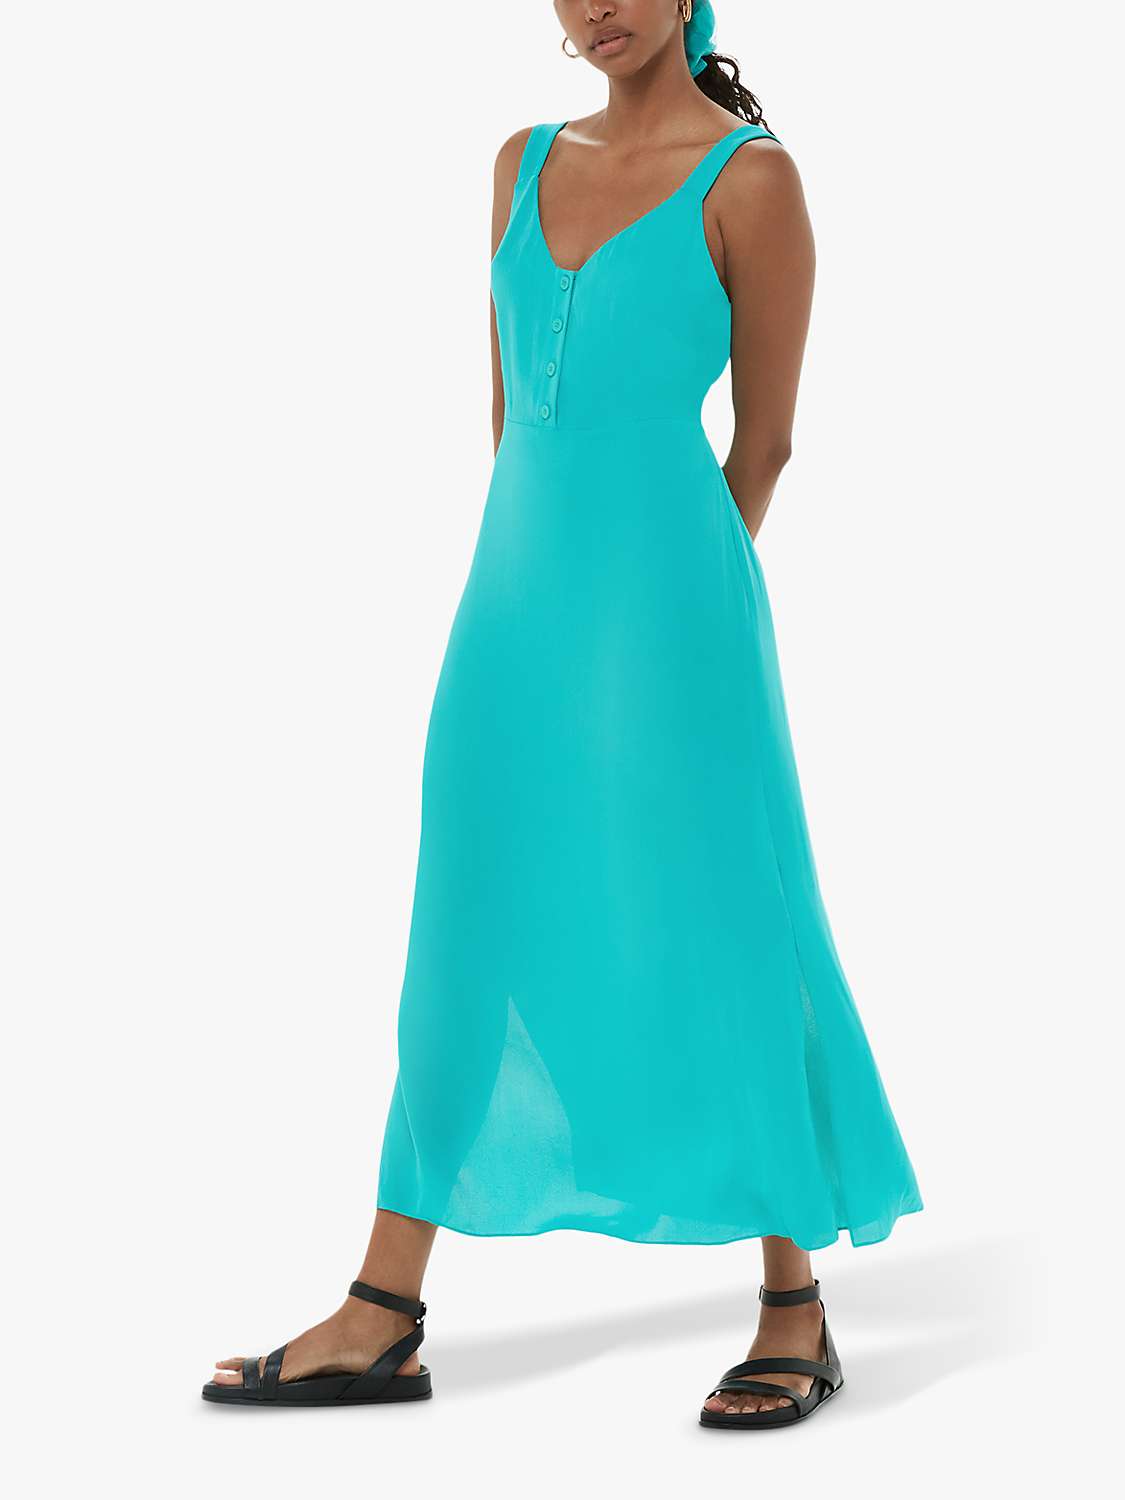 Whistles Andie Button Midi Dress, Turquoise at John Lewis & Partners